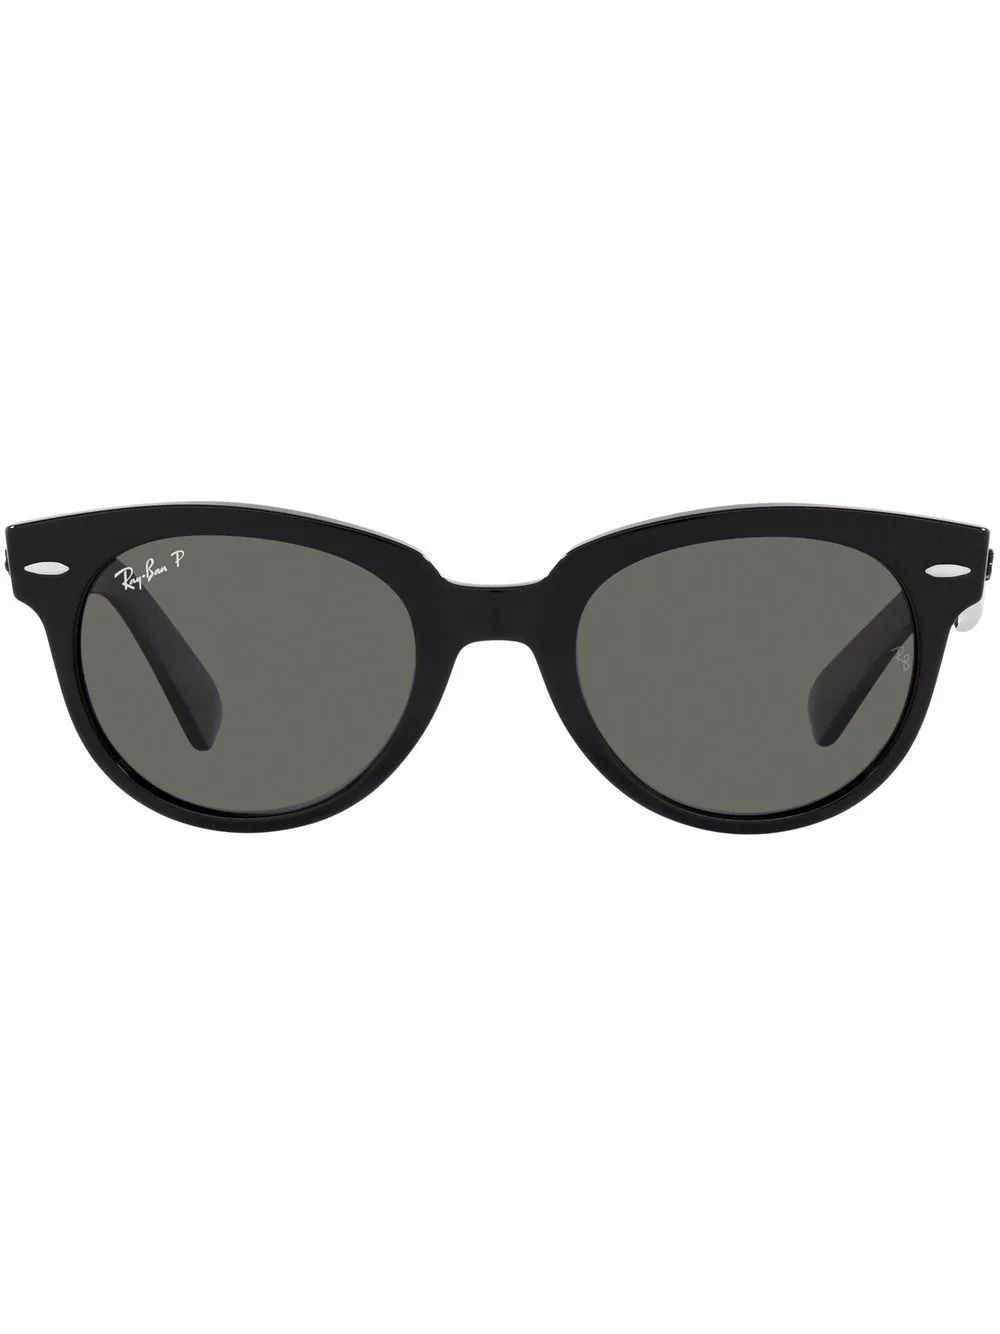 Ray-Ban Orion Zonnebril Met Rond Montuur - Farfetch | Farfetch Global